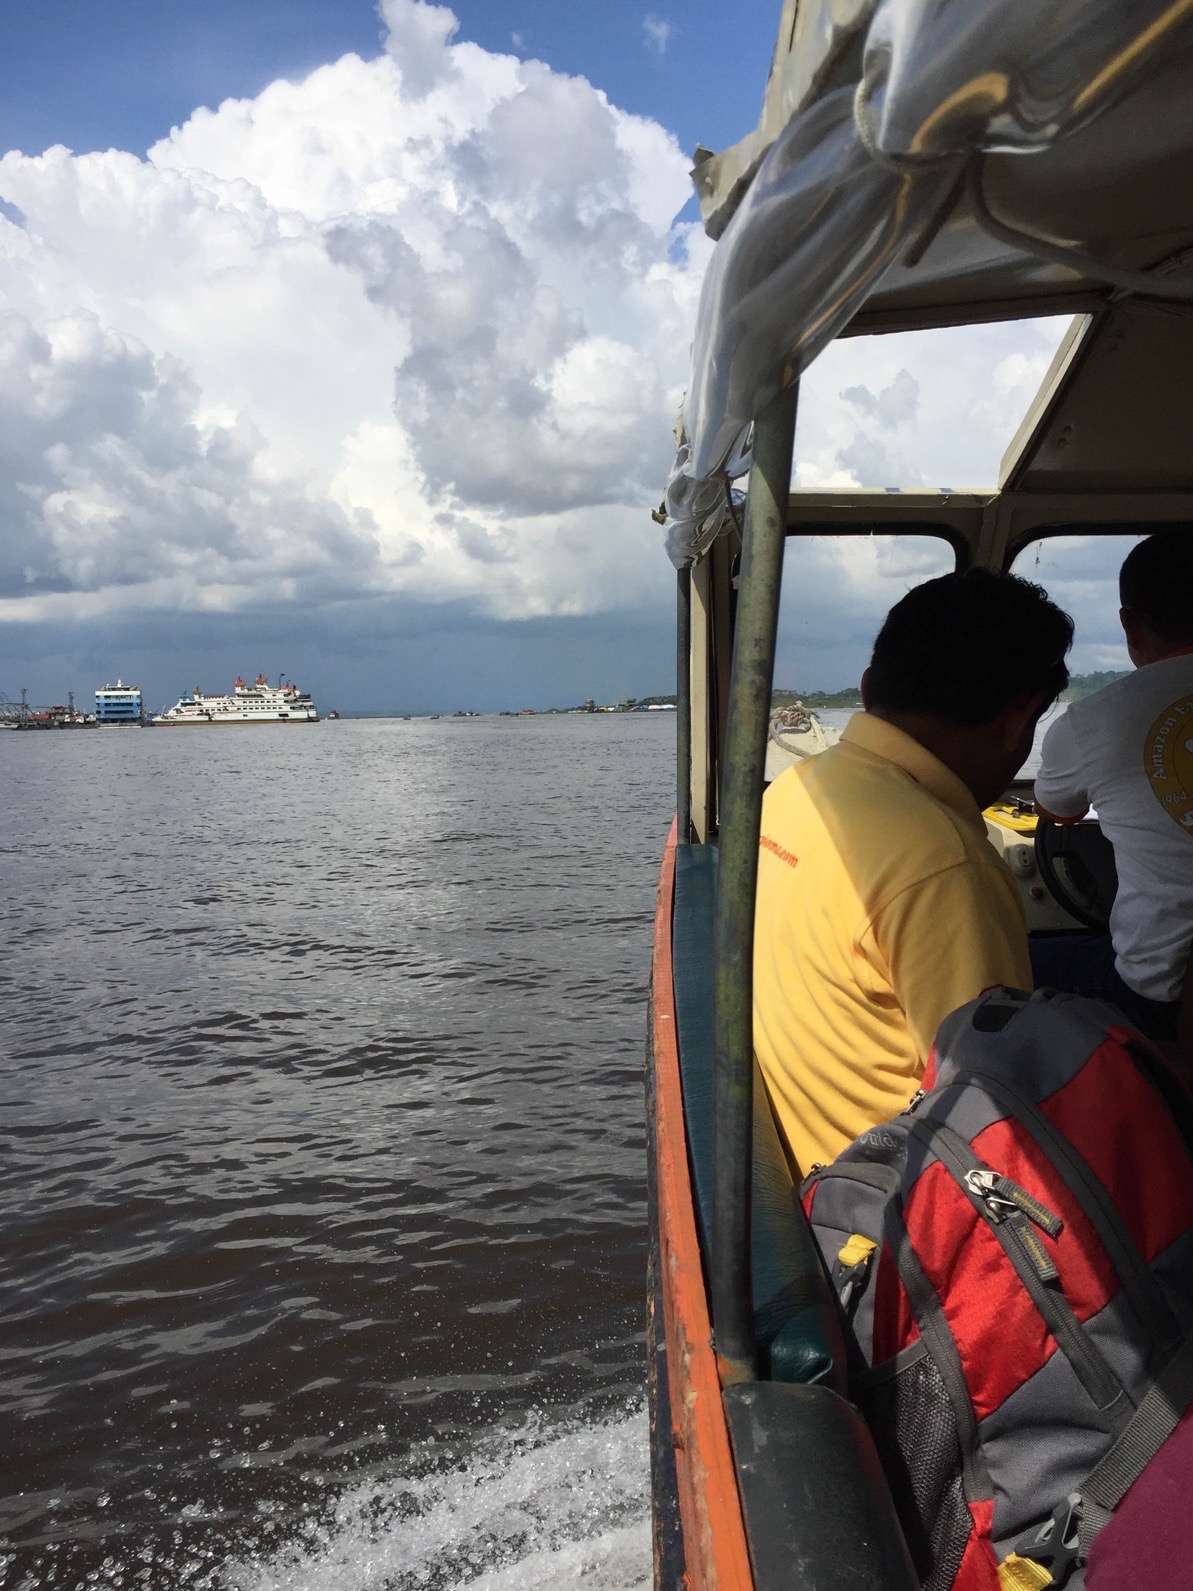 In a matter of minutes, this river boat will be in the middle of a heavy rainstorm.